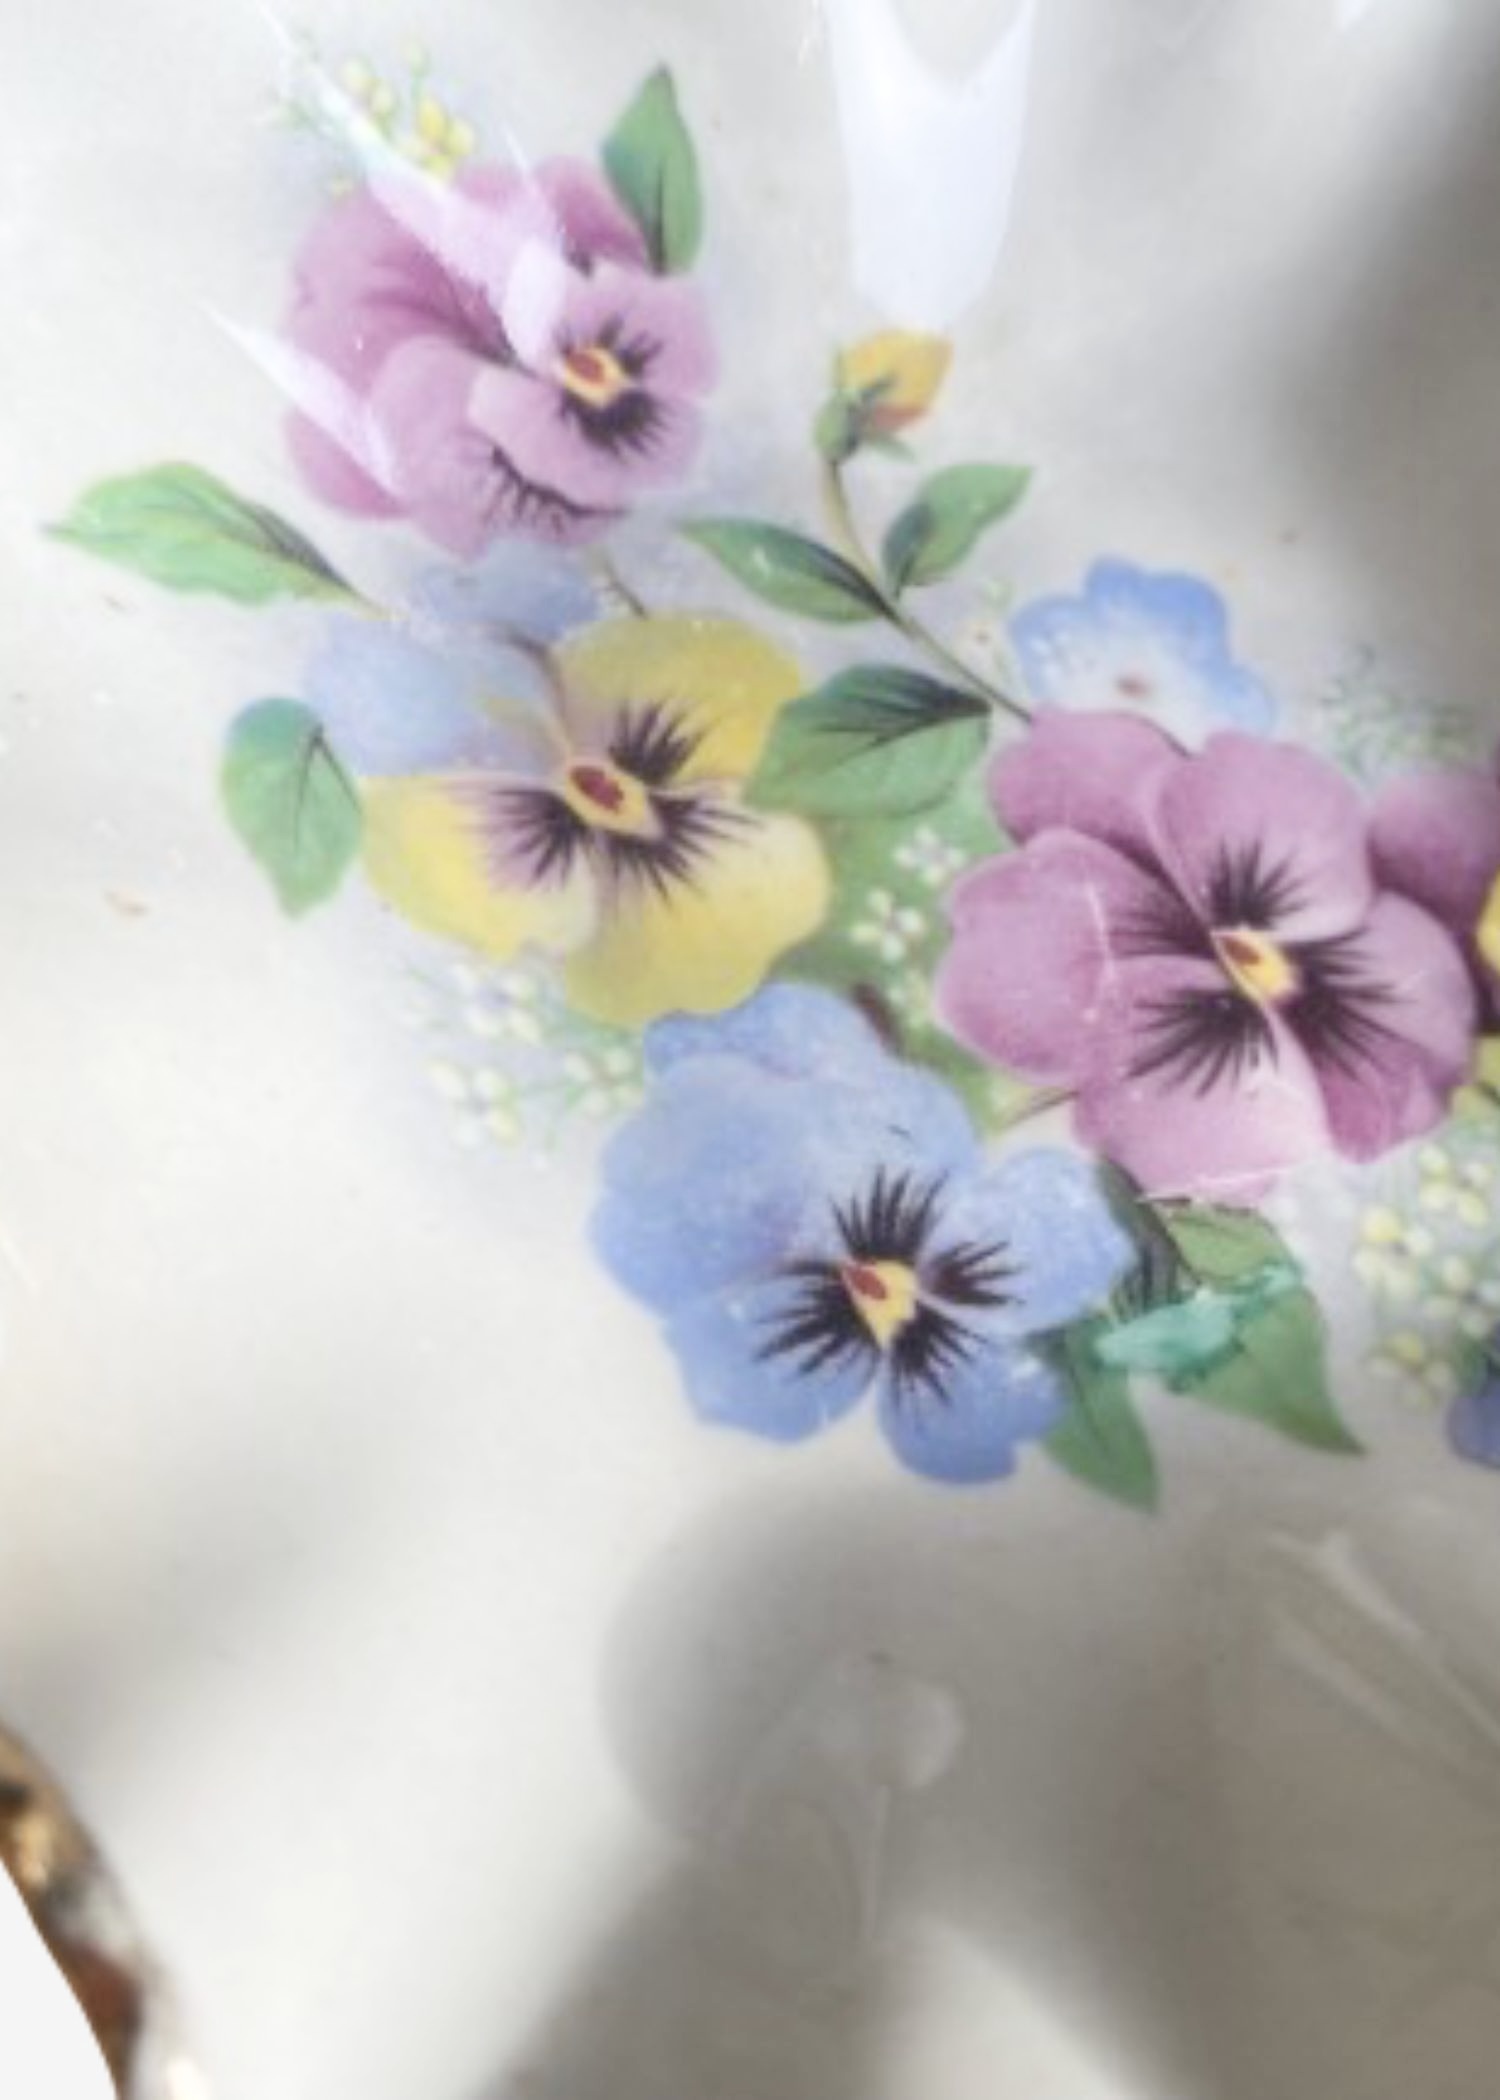 Floral Porcelain Trinket Dish    Vintage Ruffled square Shaped with Flowers pattern Accessories Decor - Made in Stwffordshire, England c1980s - Classic flower Collectable Ceramics Trending Collectors antiques